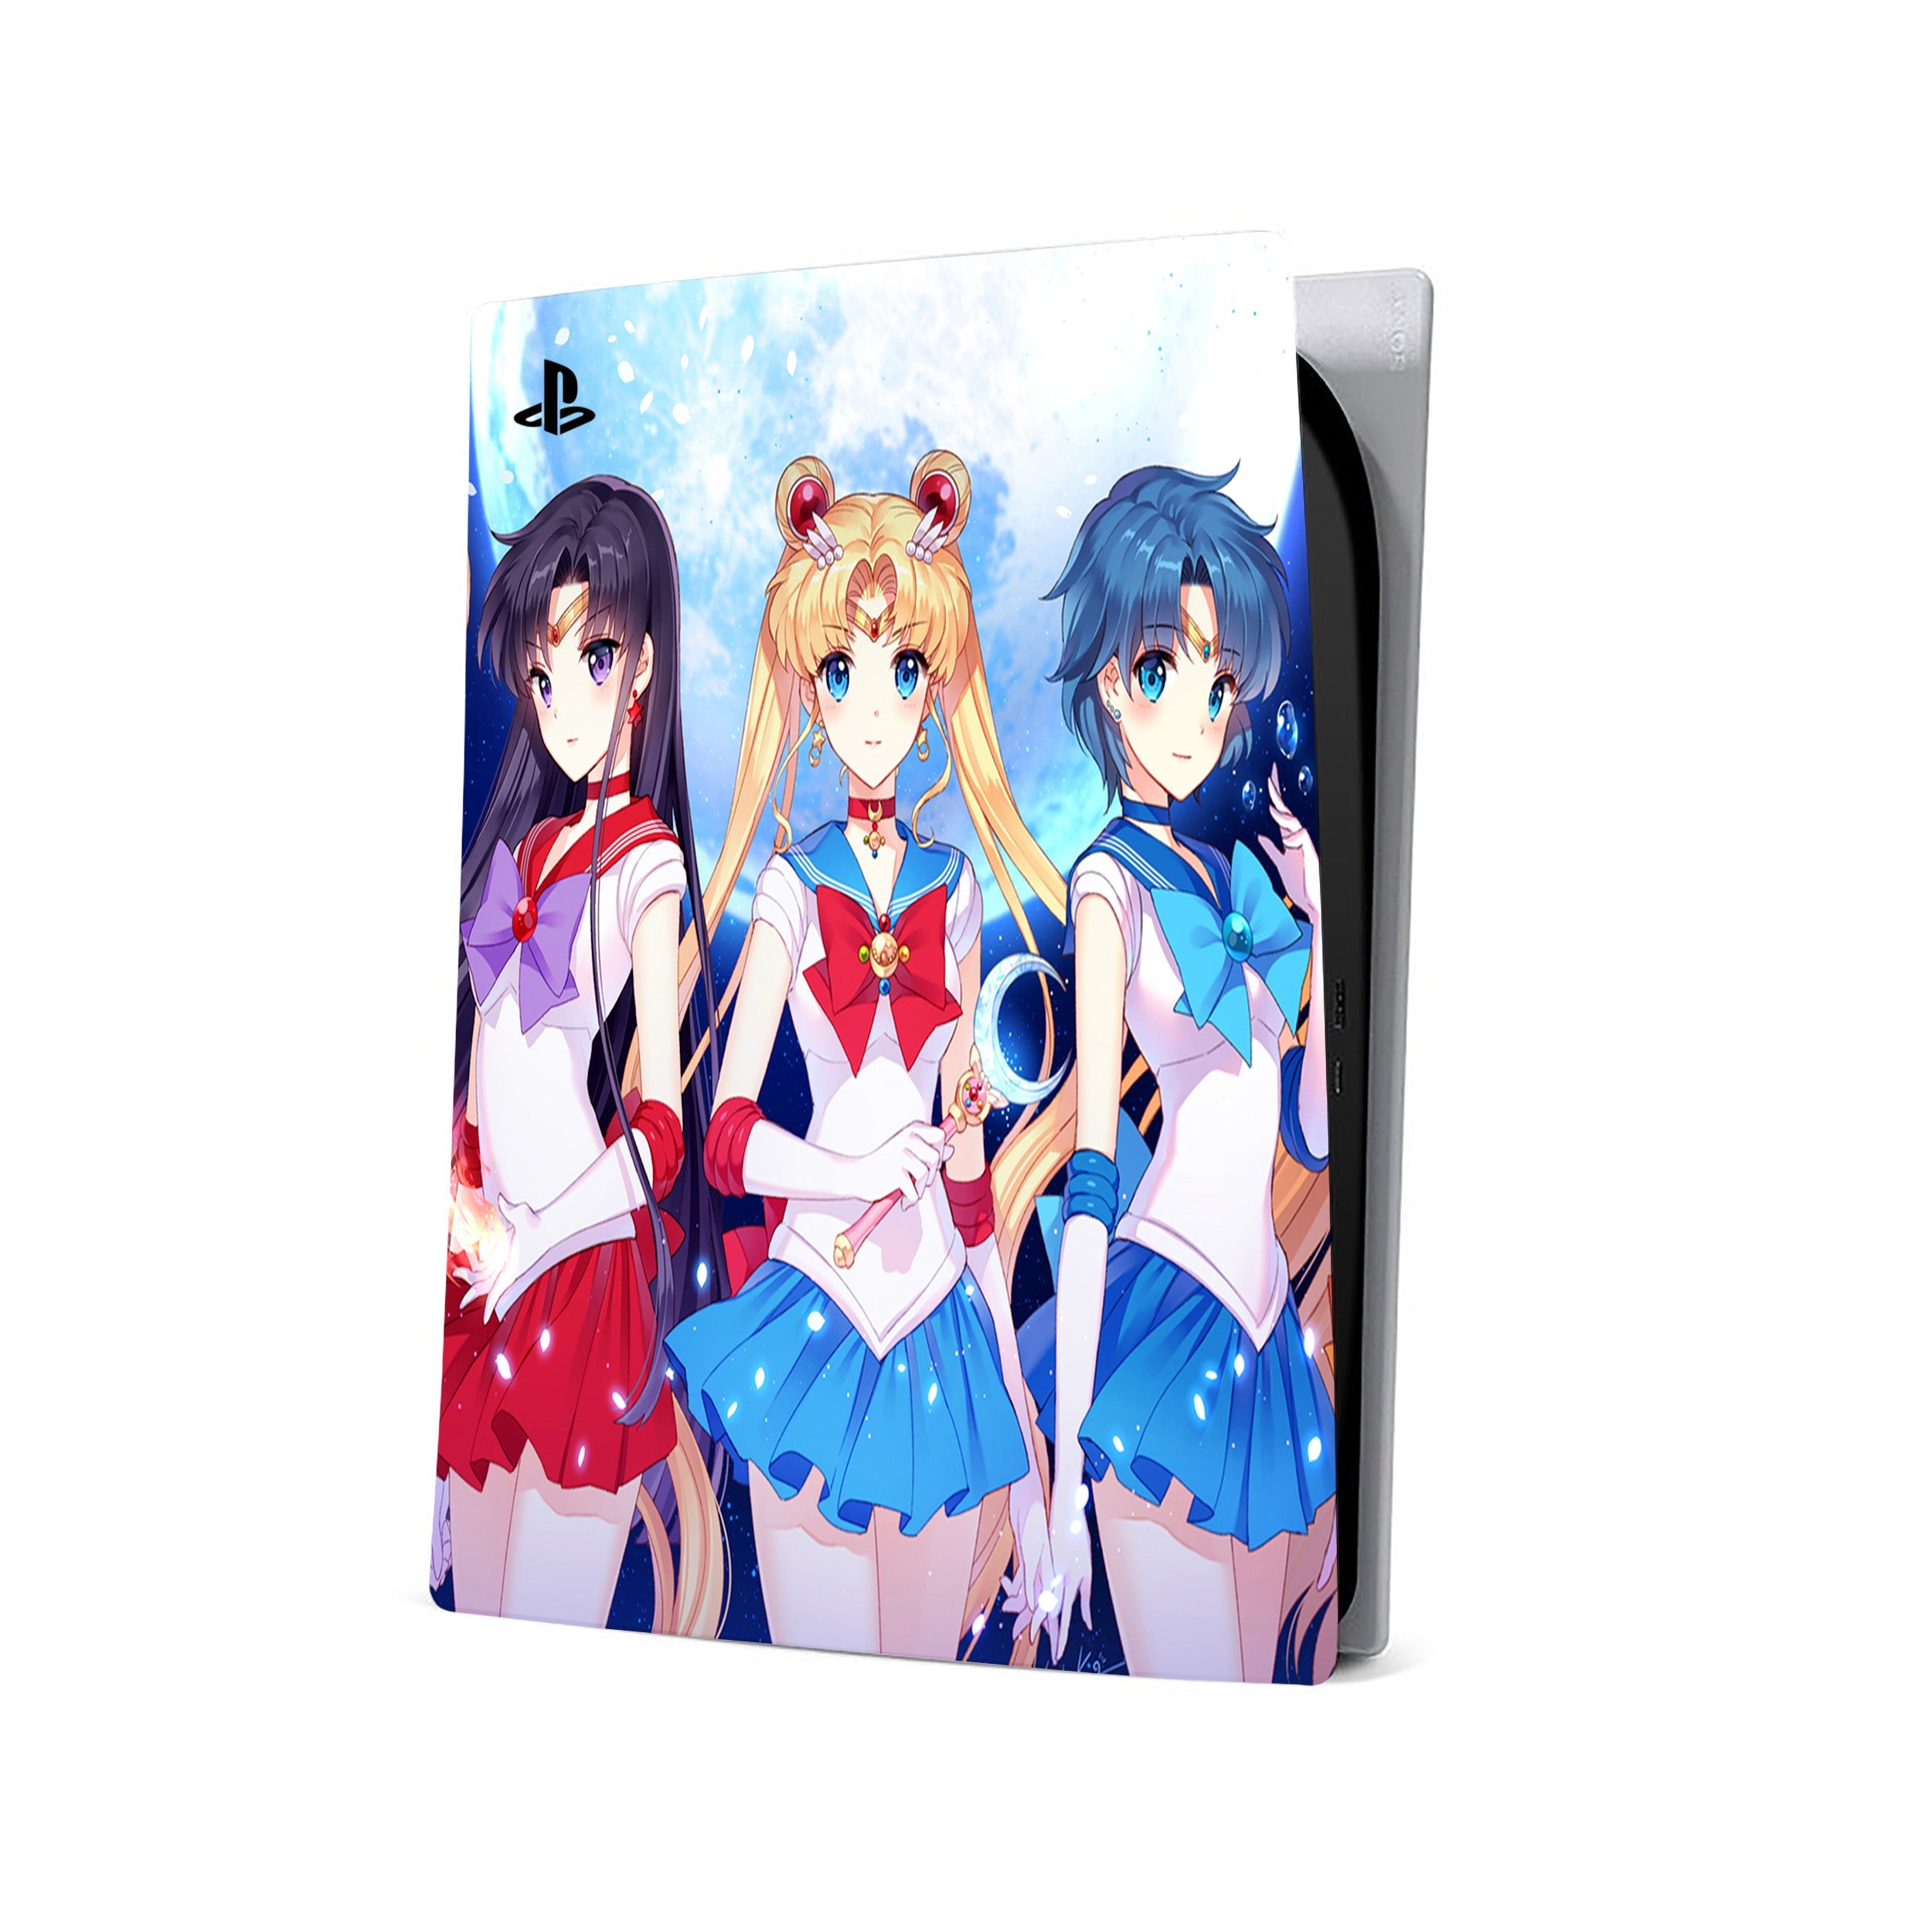 A video game skin featuring a Sailor Moon design for the PS5.